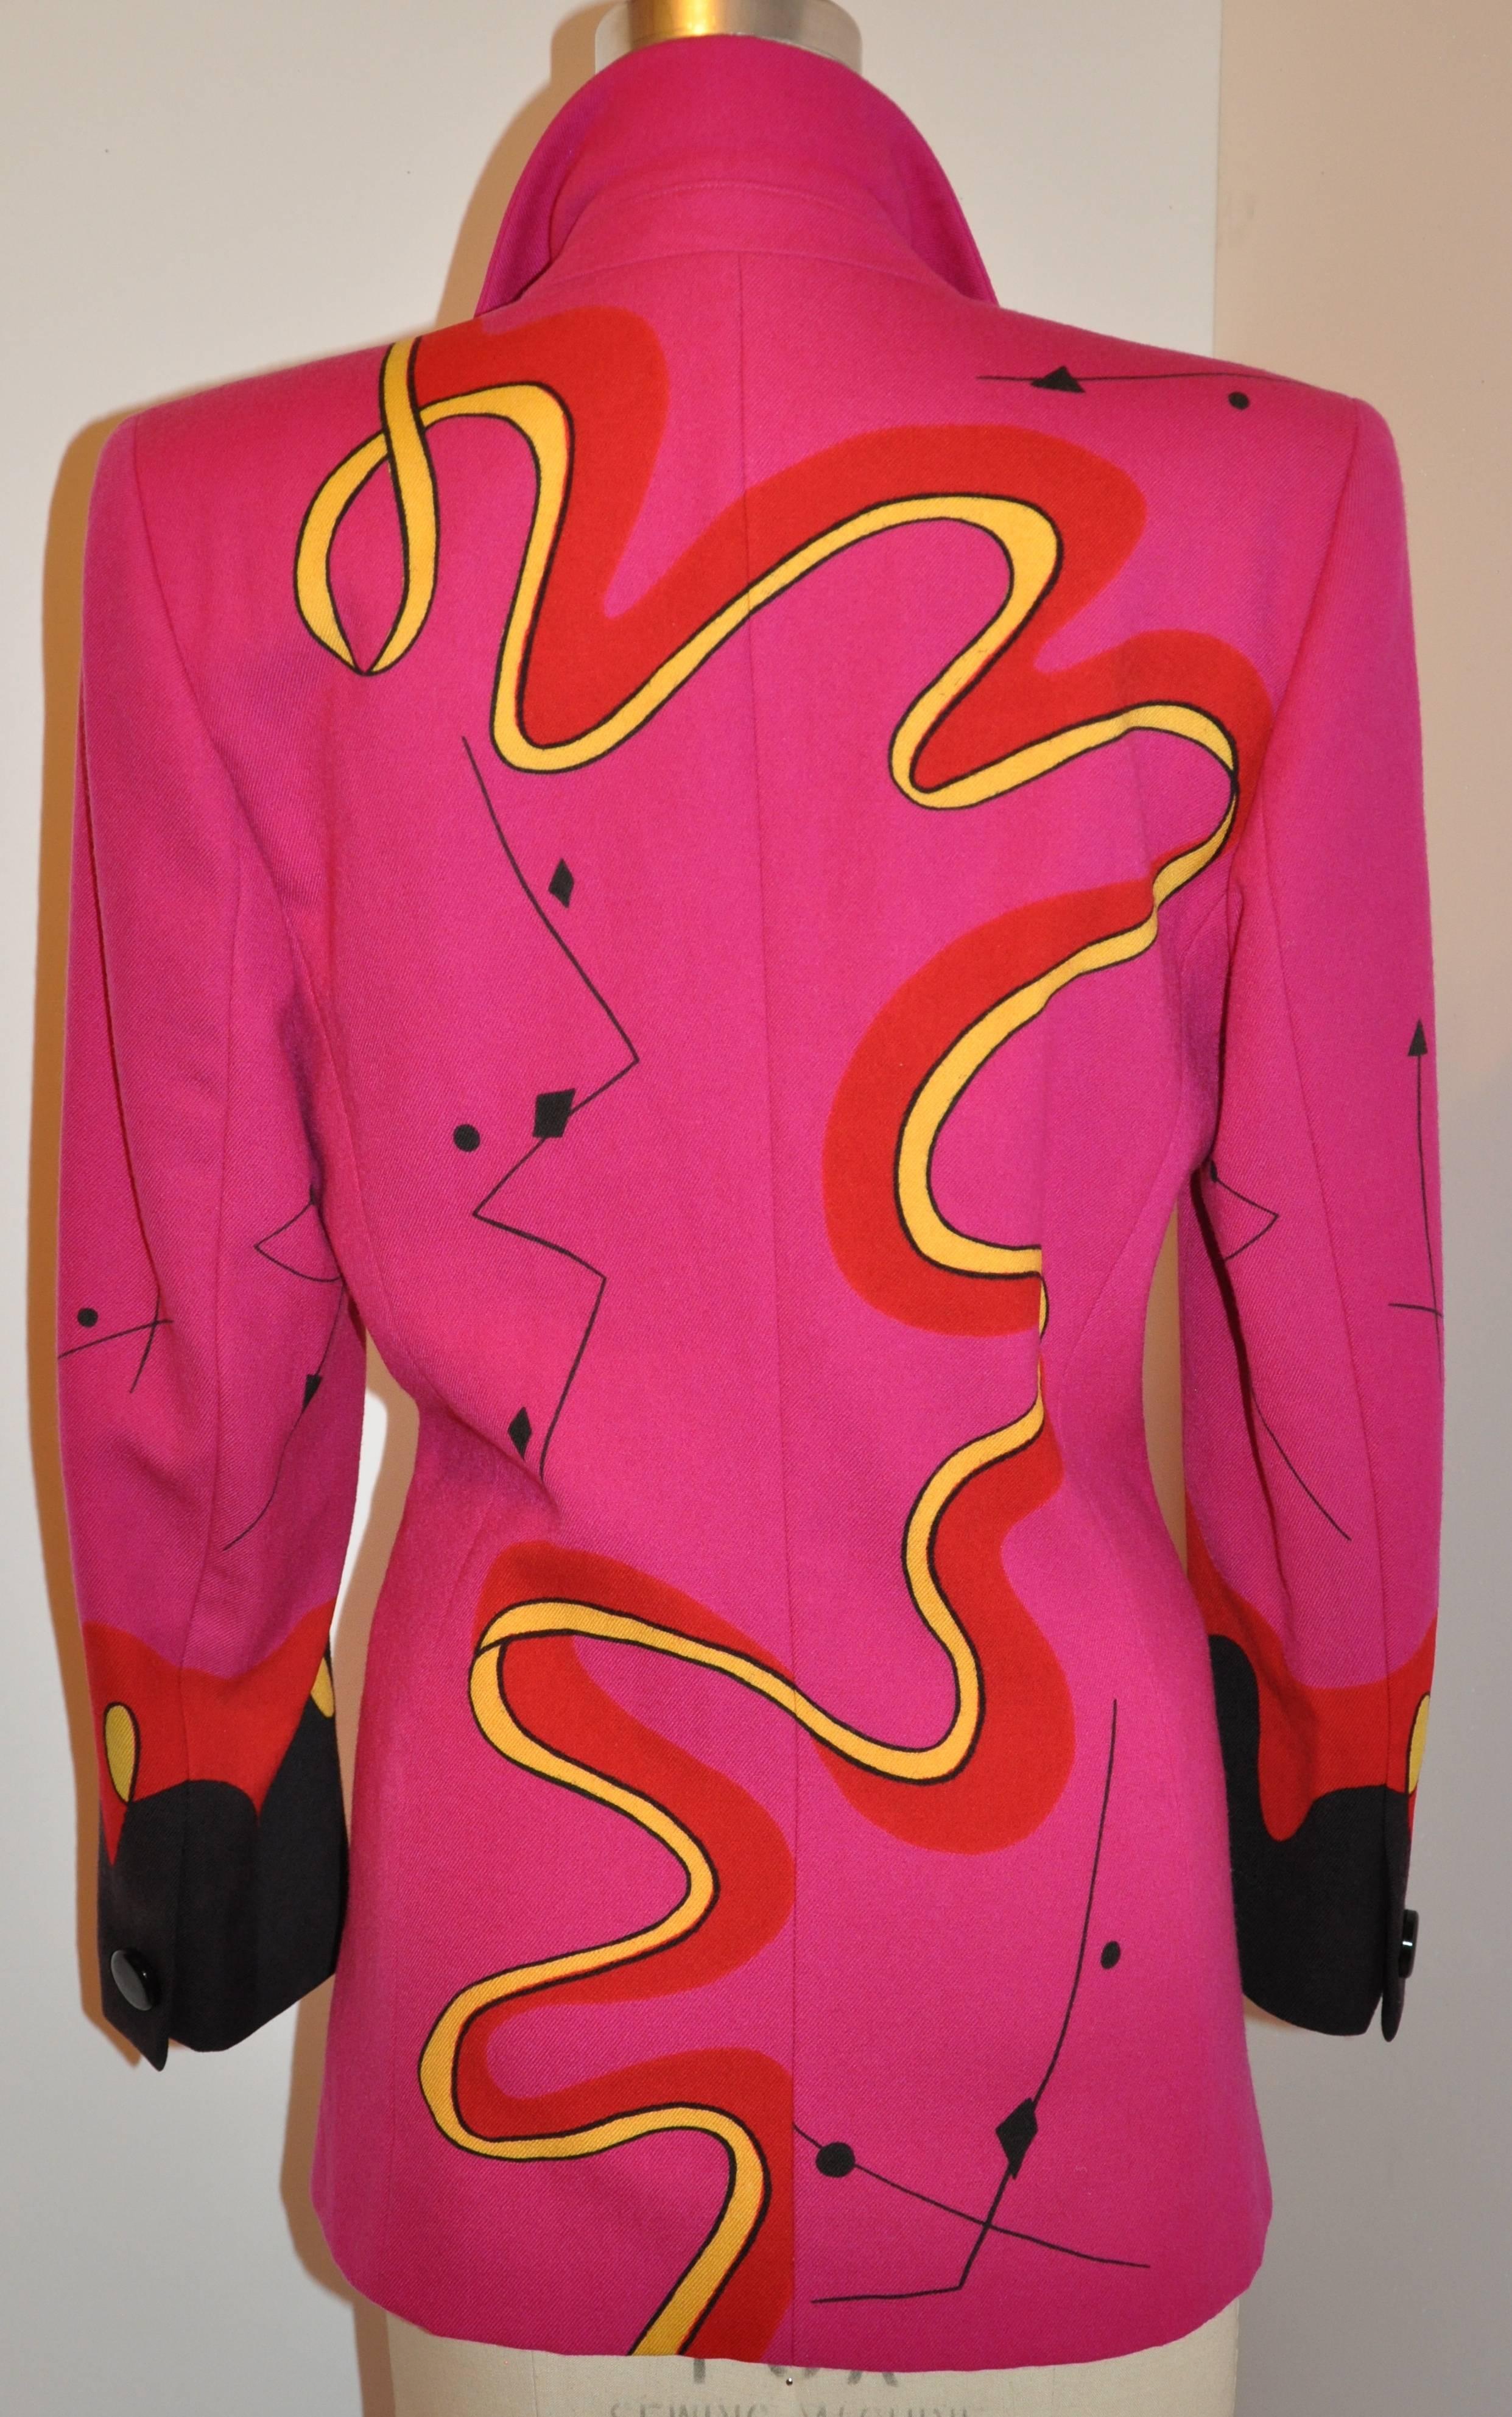         Escada by Margaretha Ley's wonderfully detailed and whimsical bold abstract fuchsia 